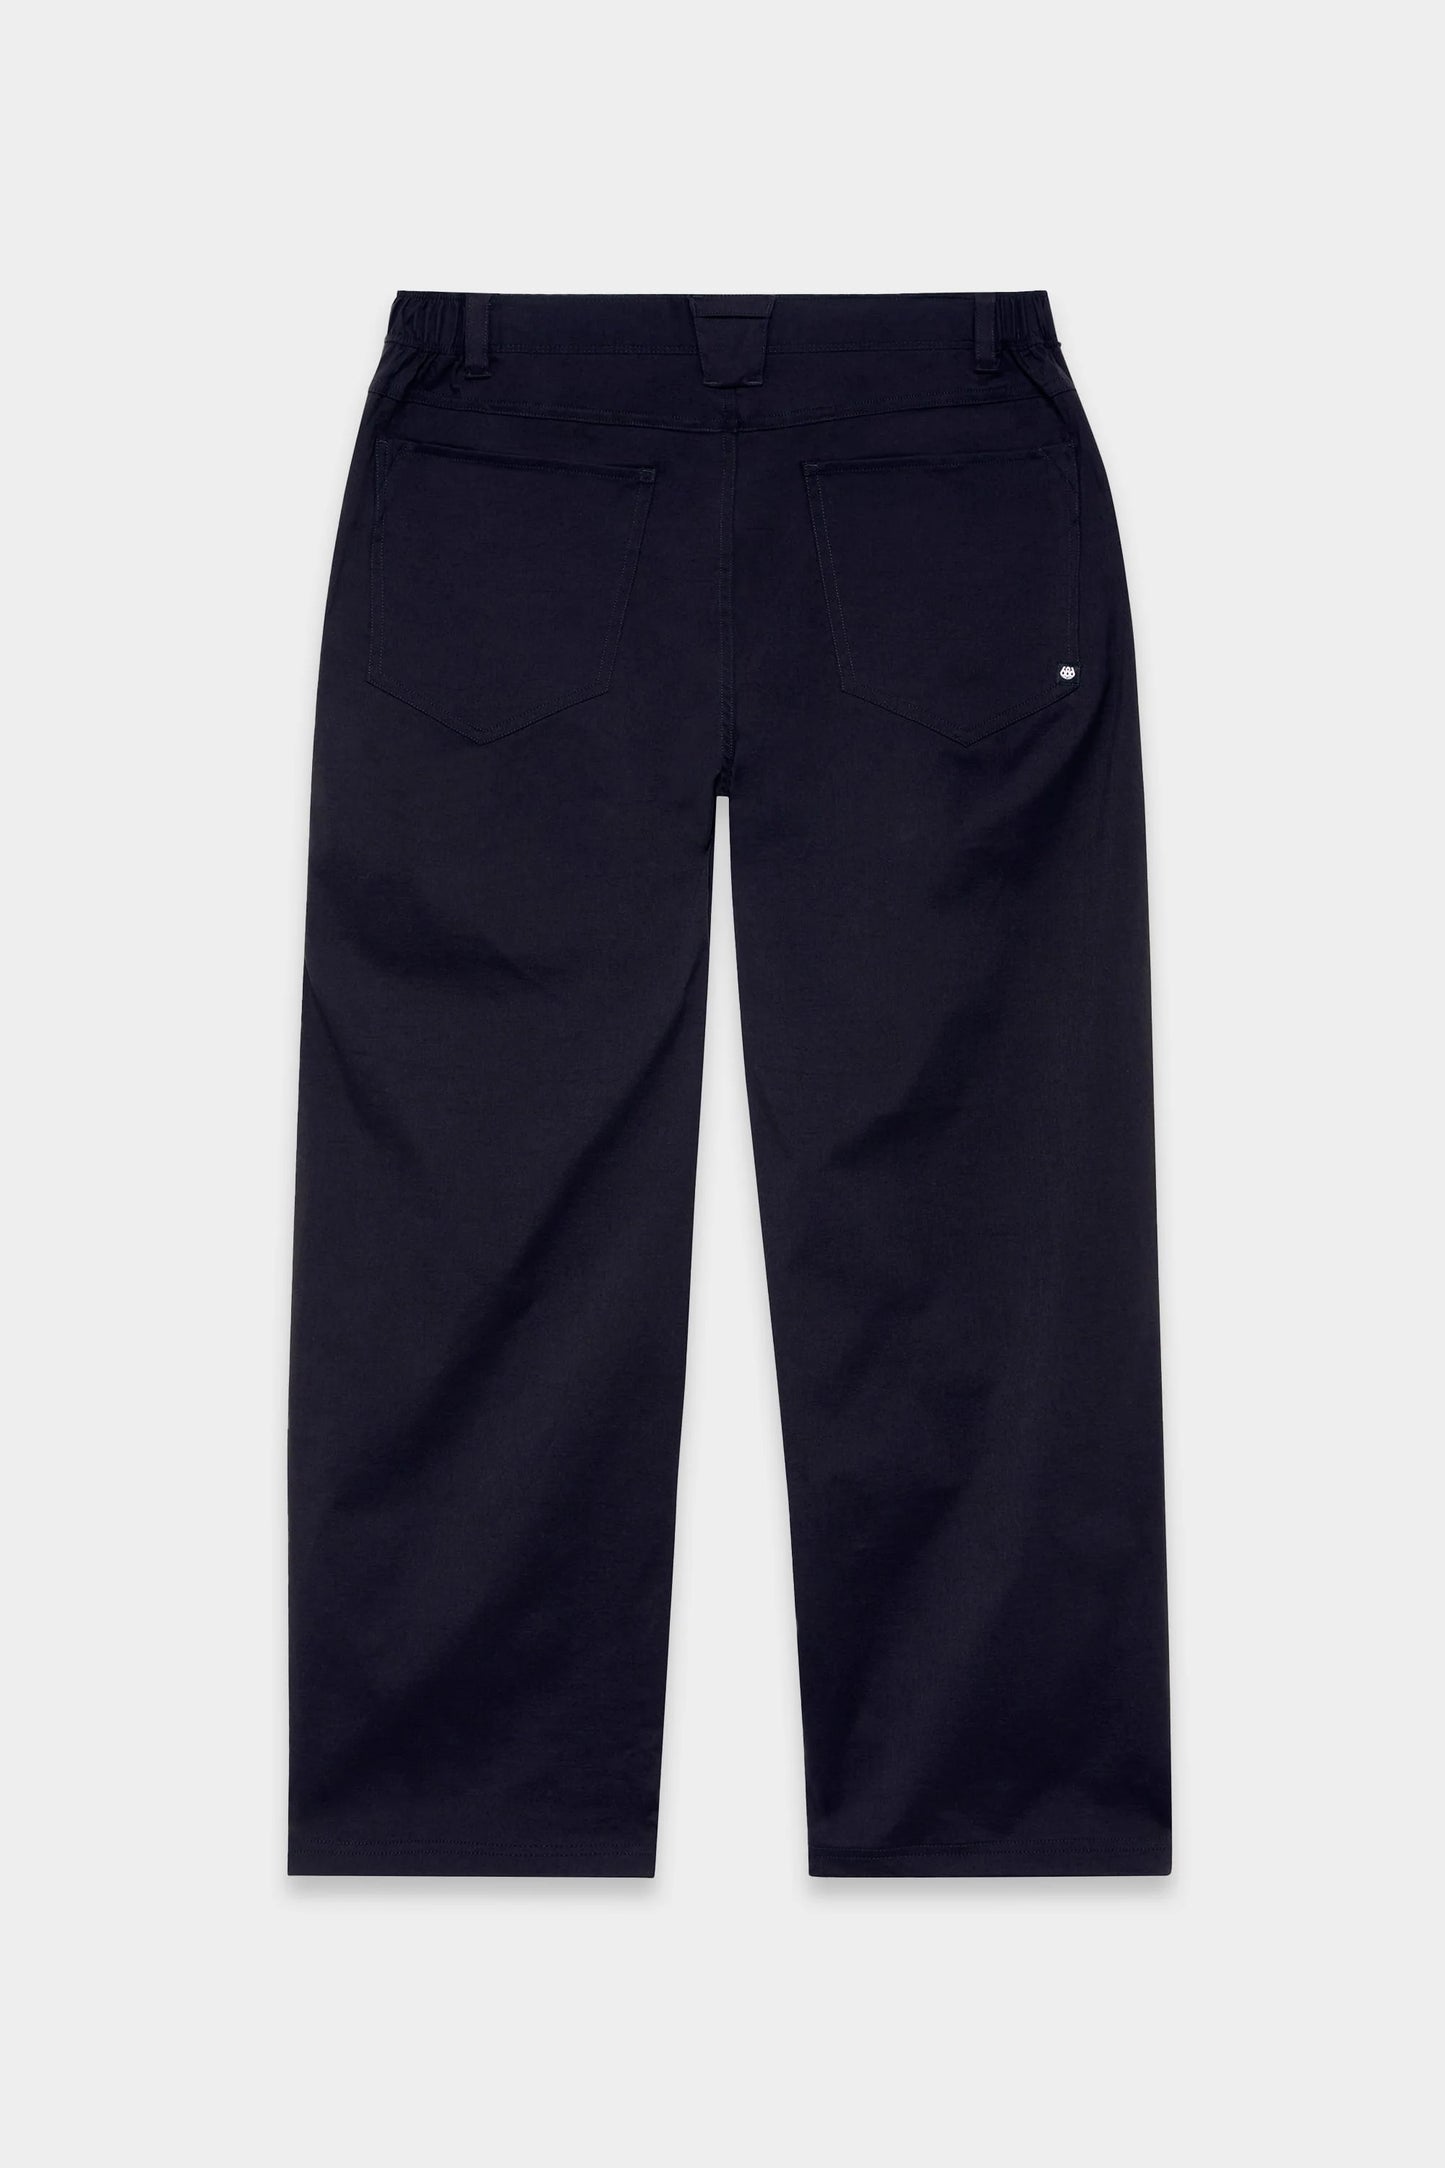 686 - Everywhere Wide Pant